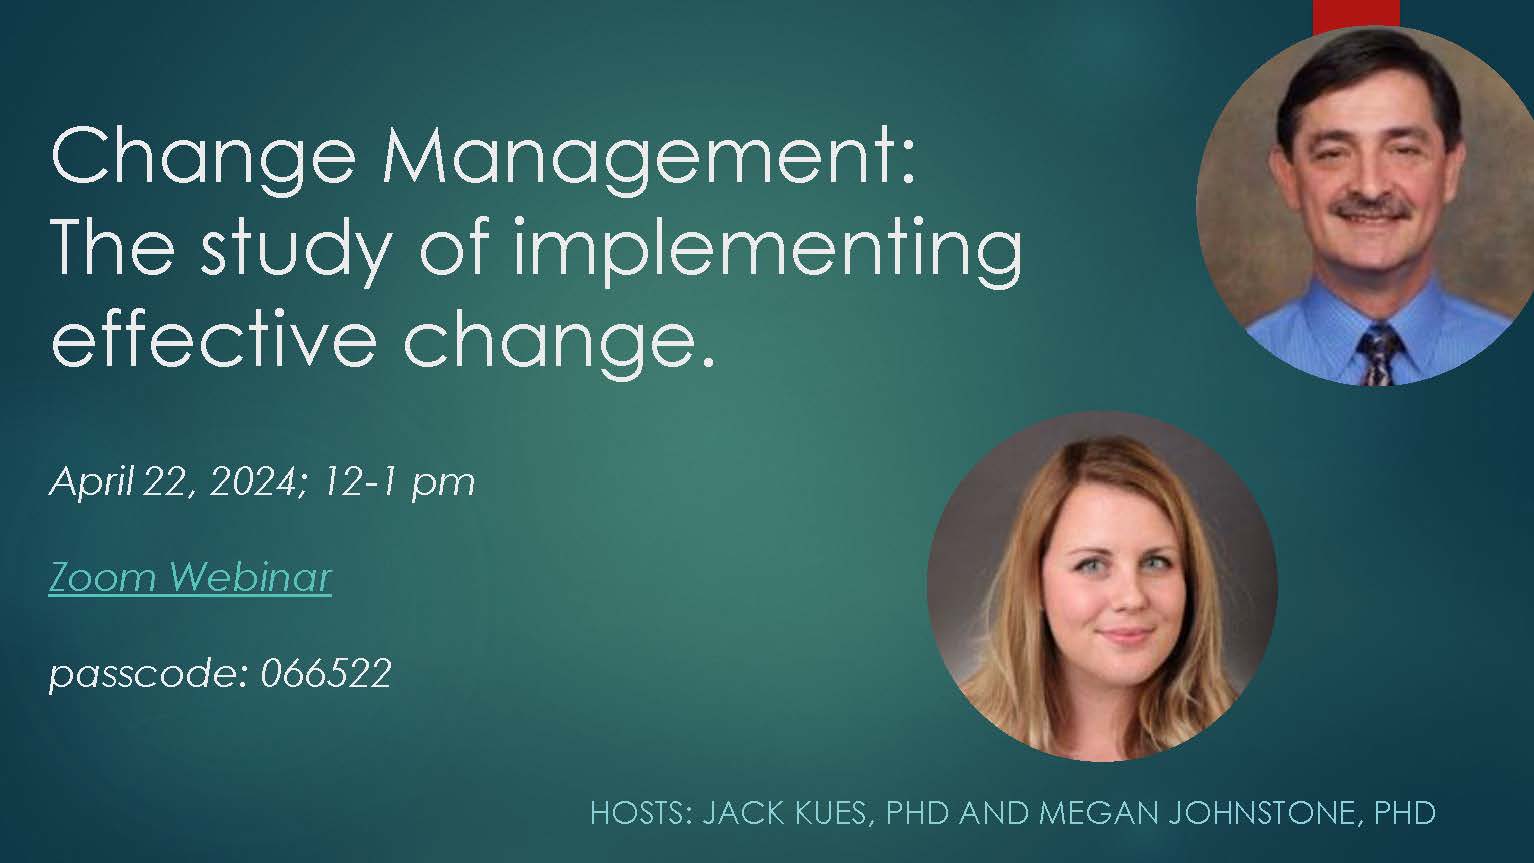 Change Management: The study of implementing effective change